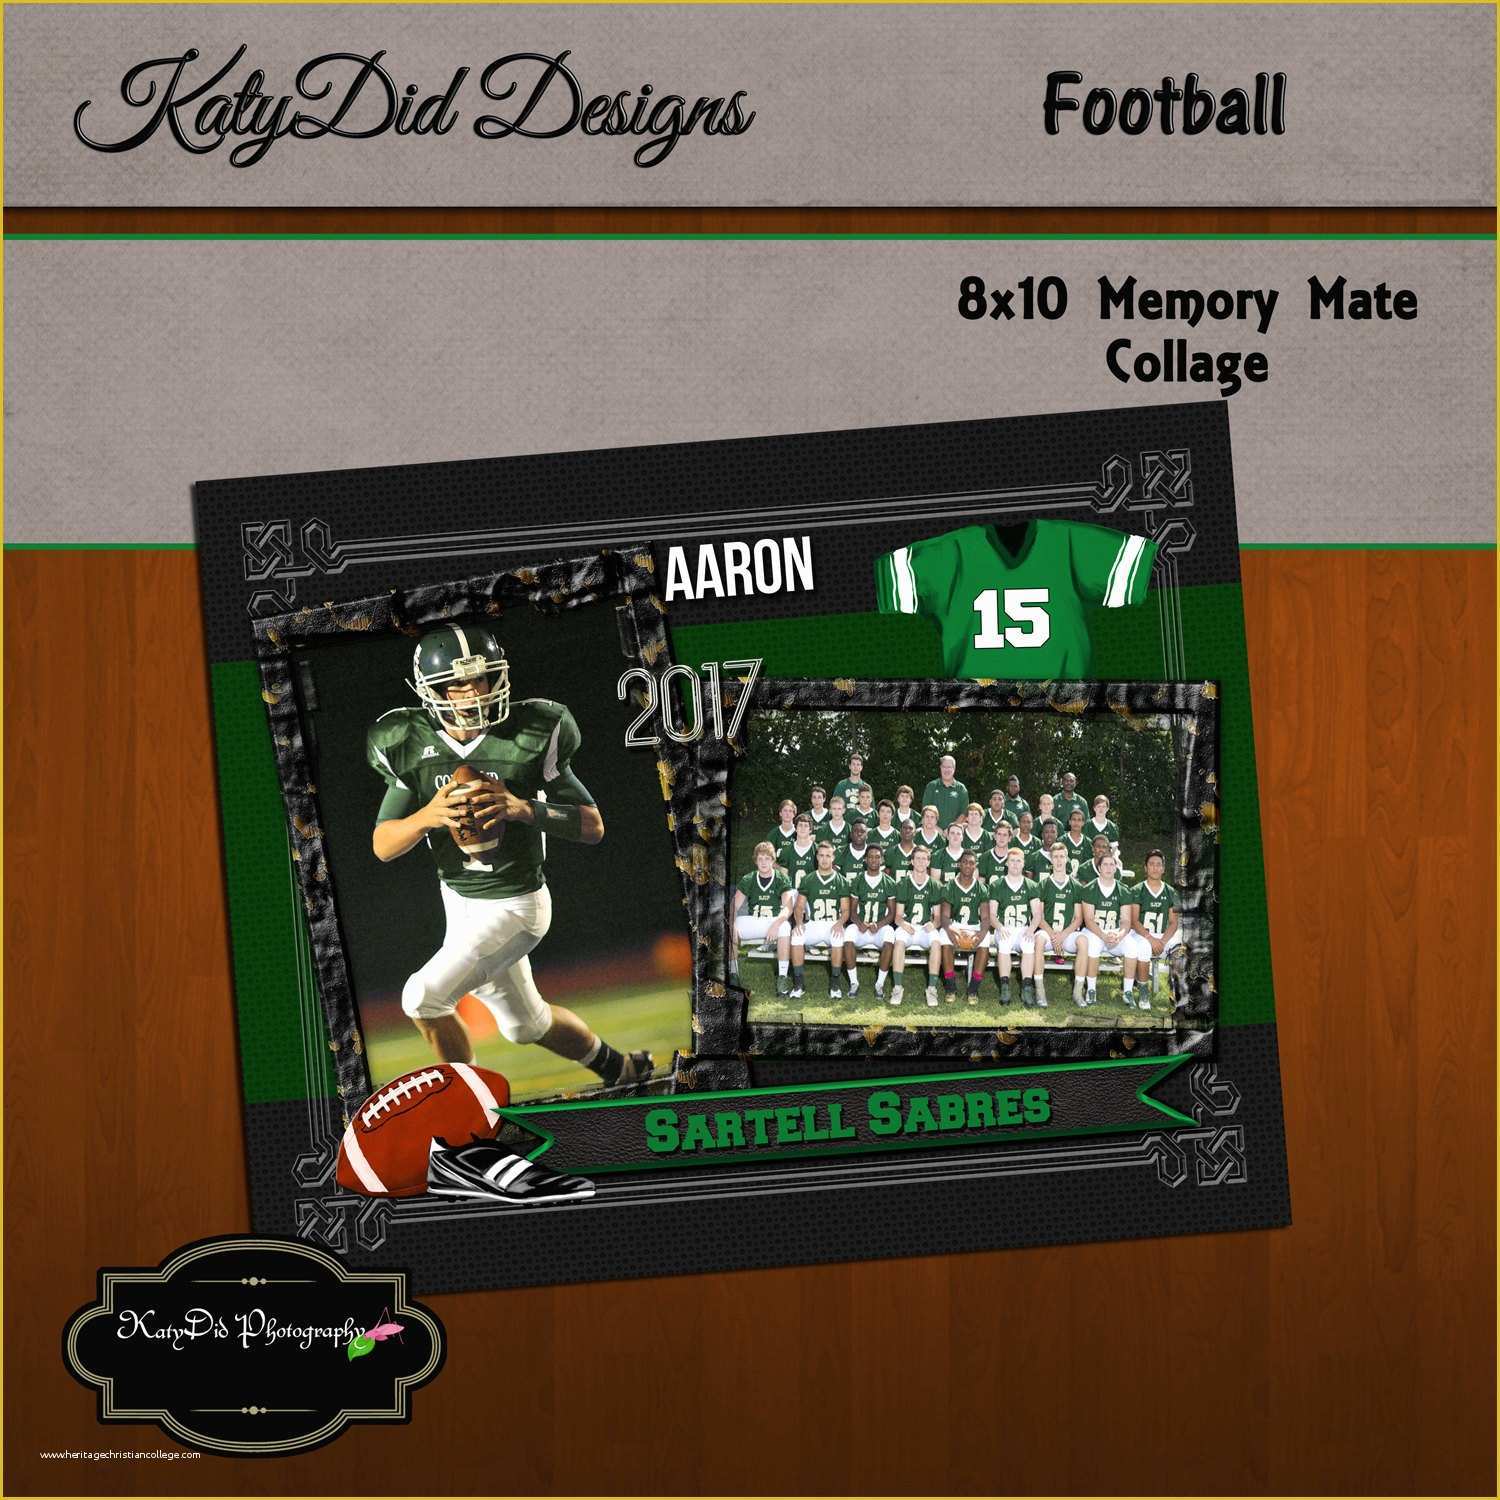 Free Football Memory Mate Templates Of 8x10 Memory Mate Tackle Football Collage or Storyboard now